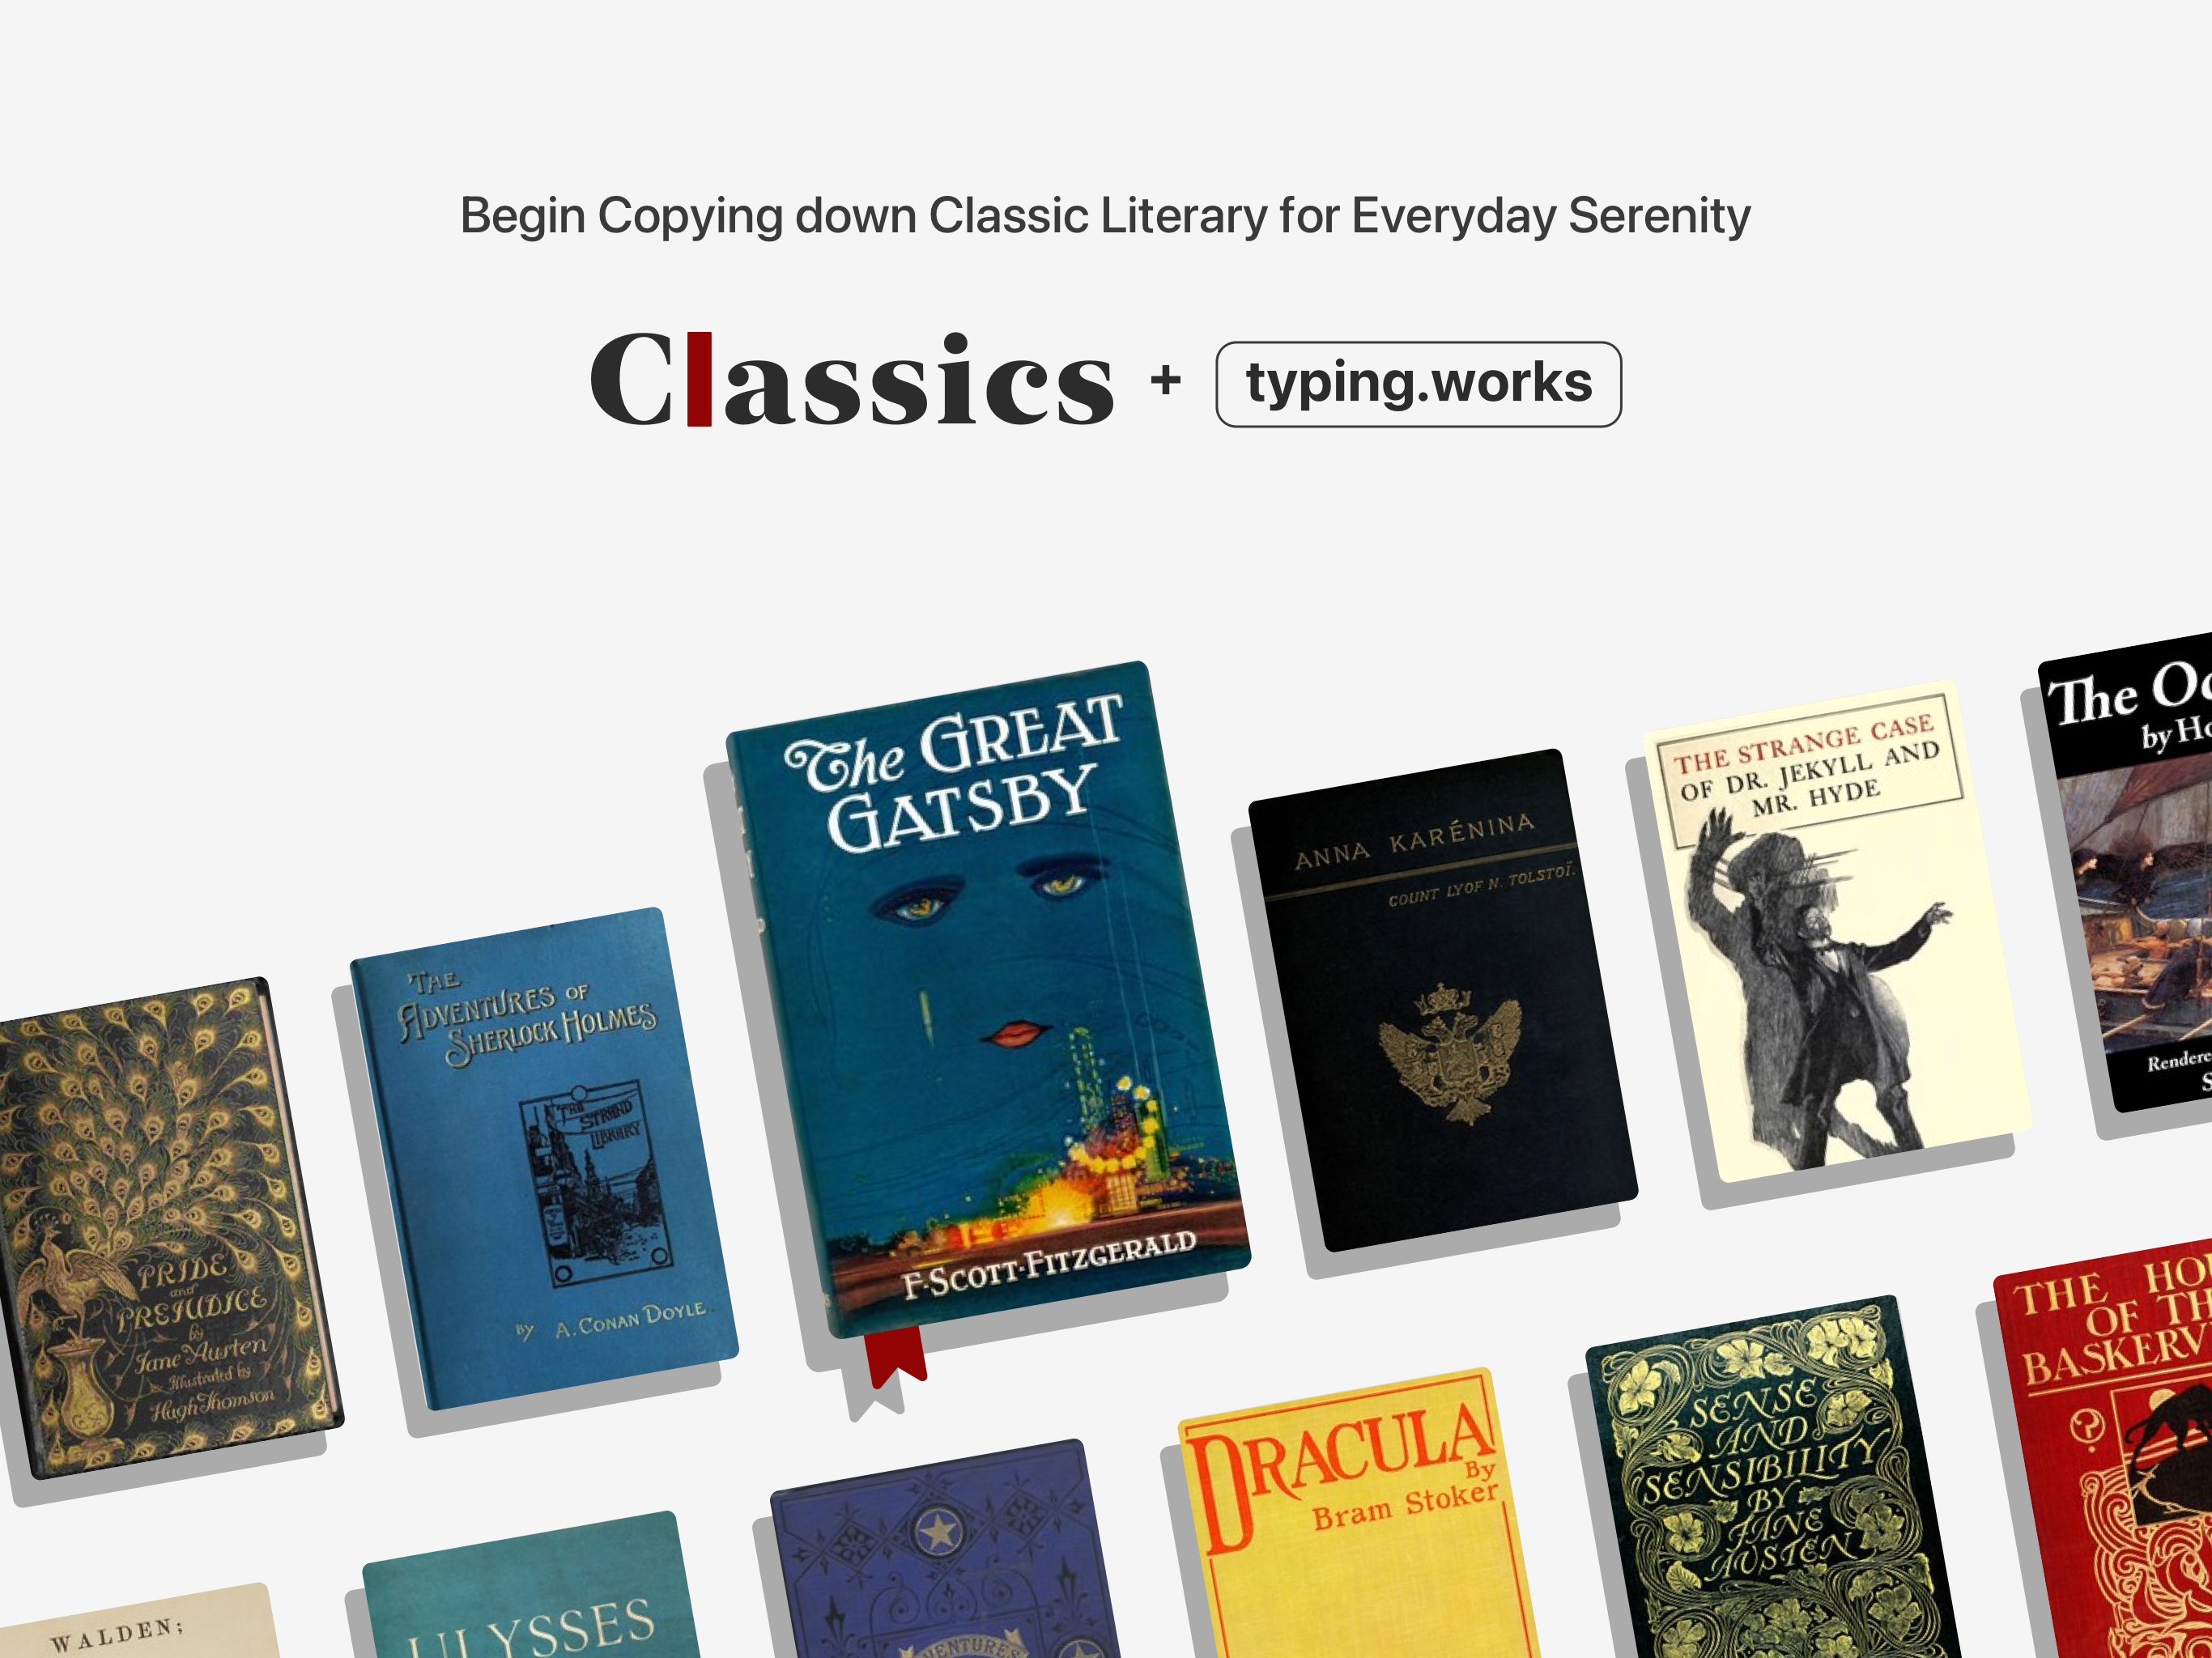 Classics+typing.works